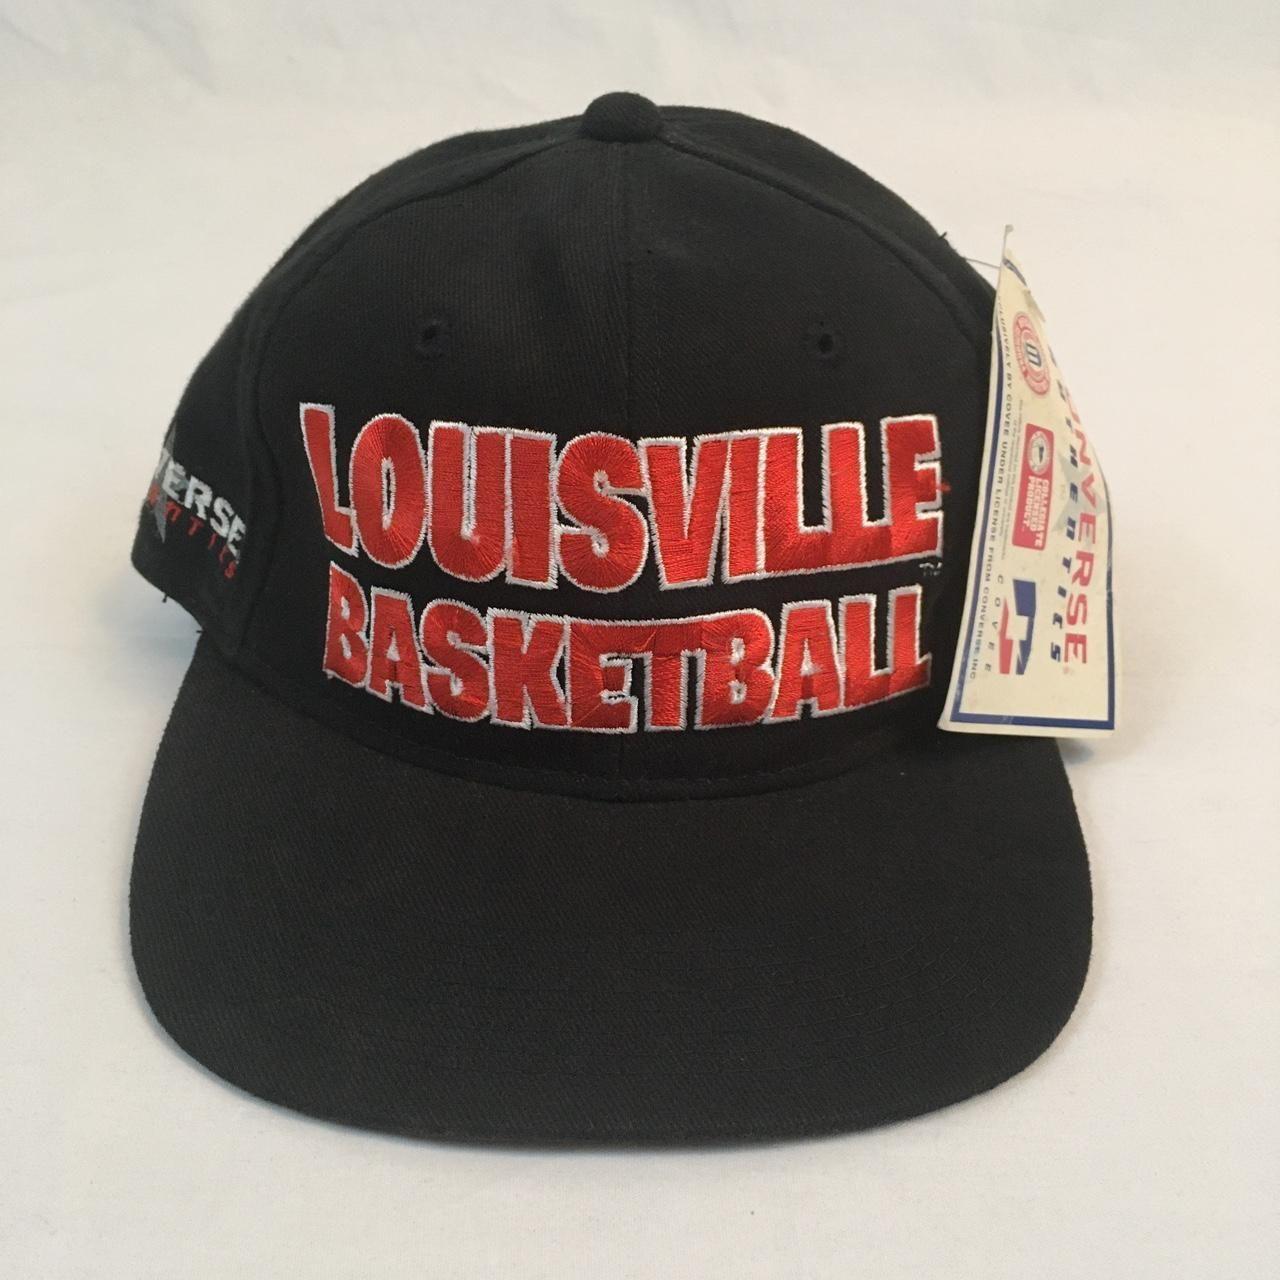 new-with-tags Louisville Cardinals hat cap, University of Louisville